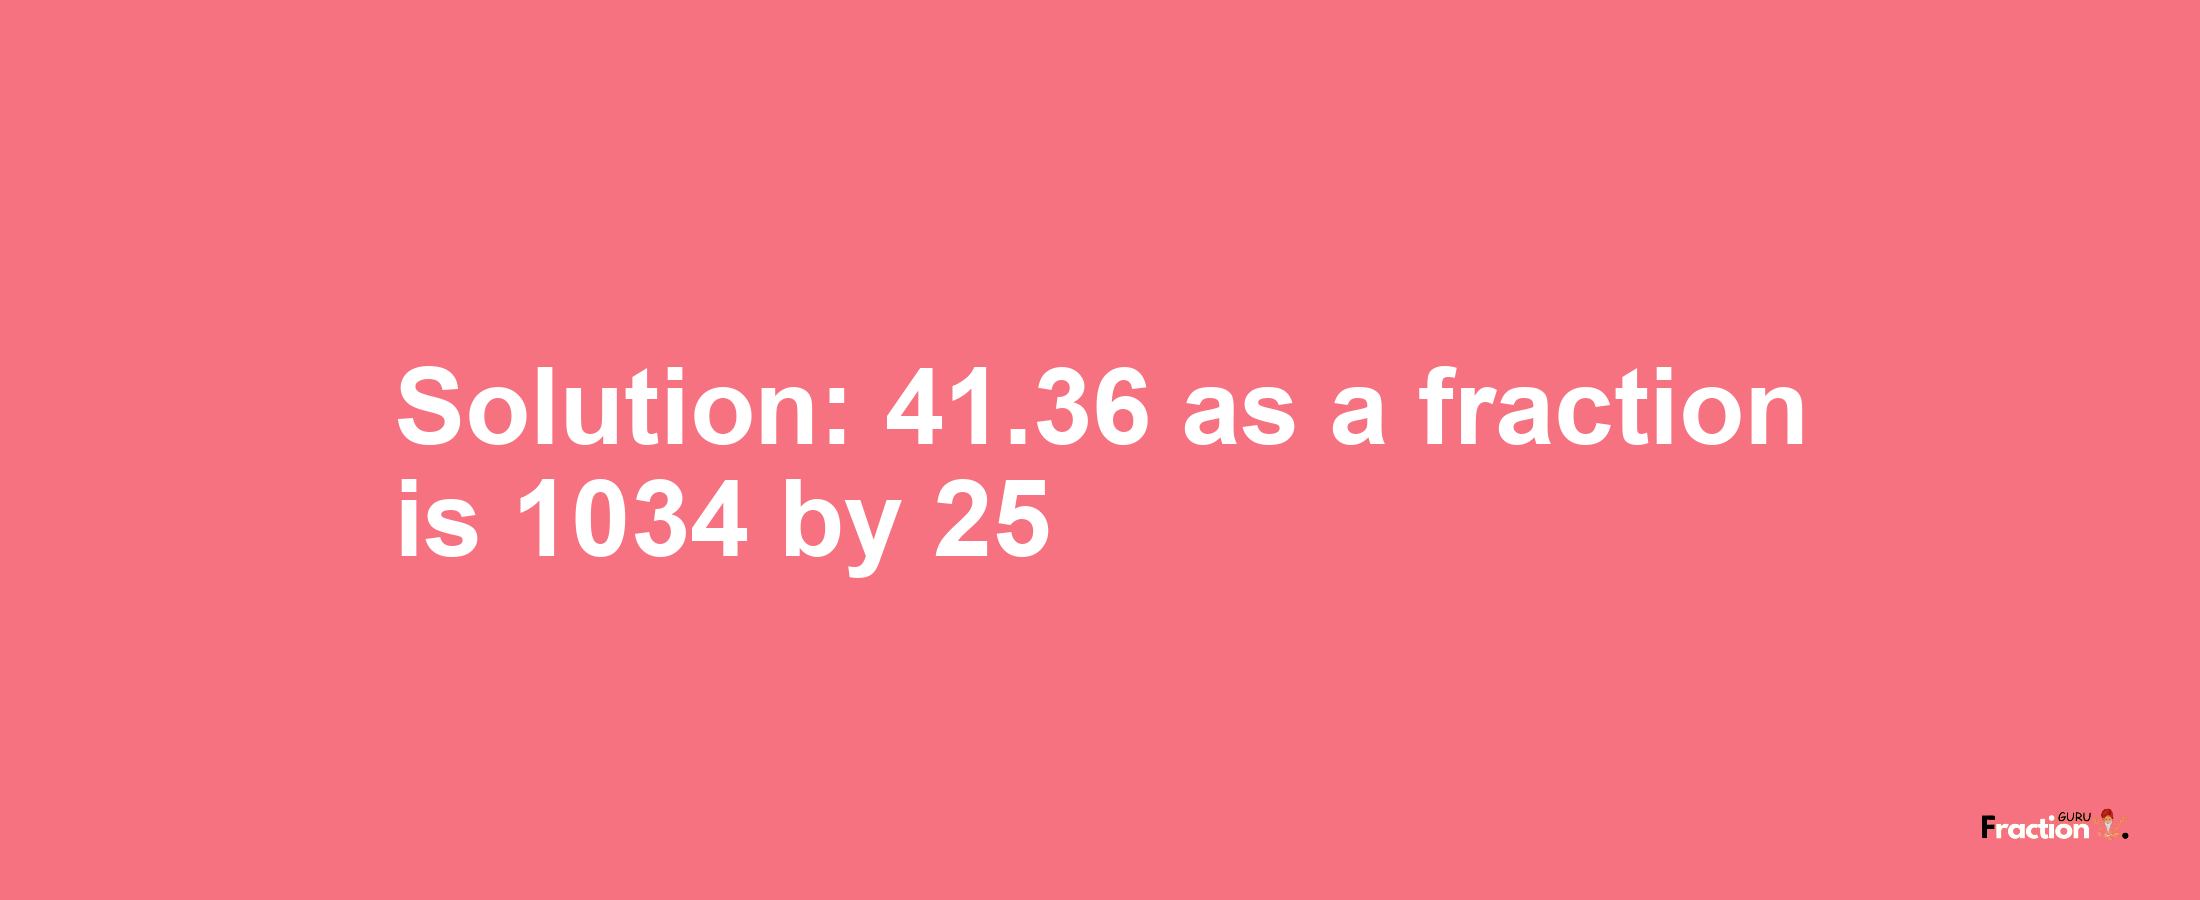 Solution:41.36 as a fraction is 1034/25